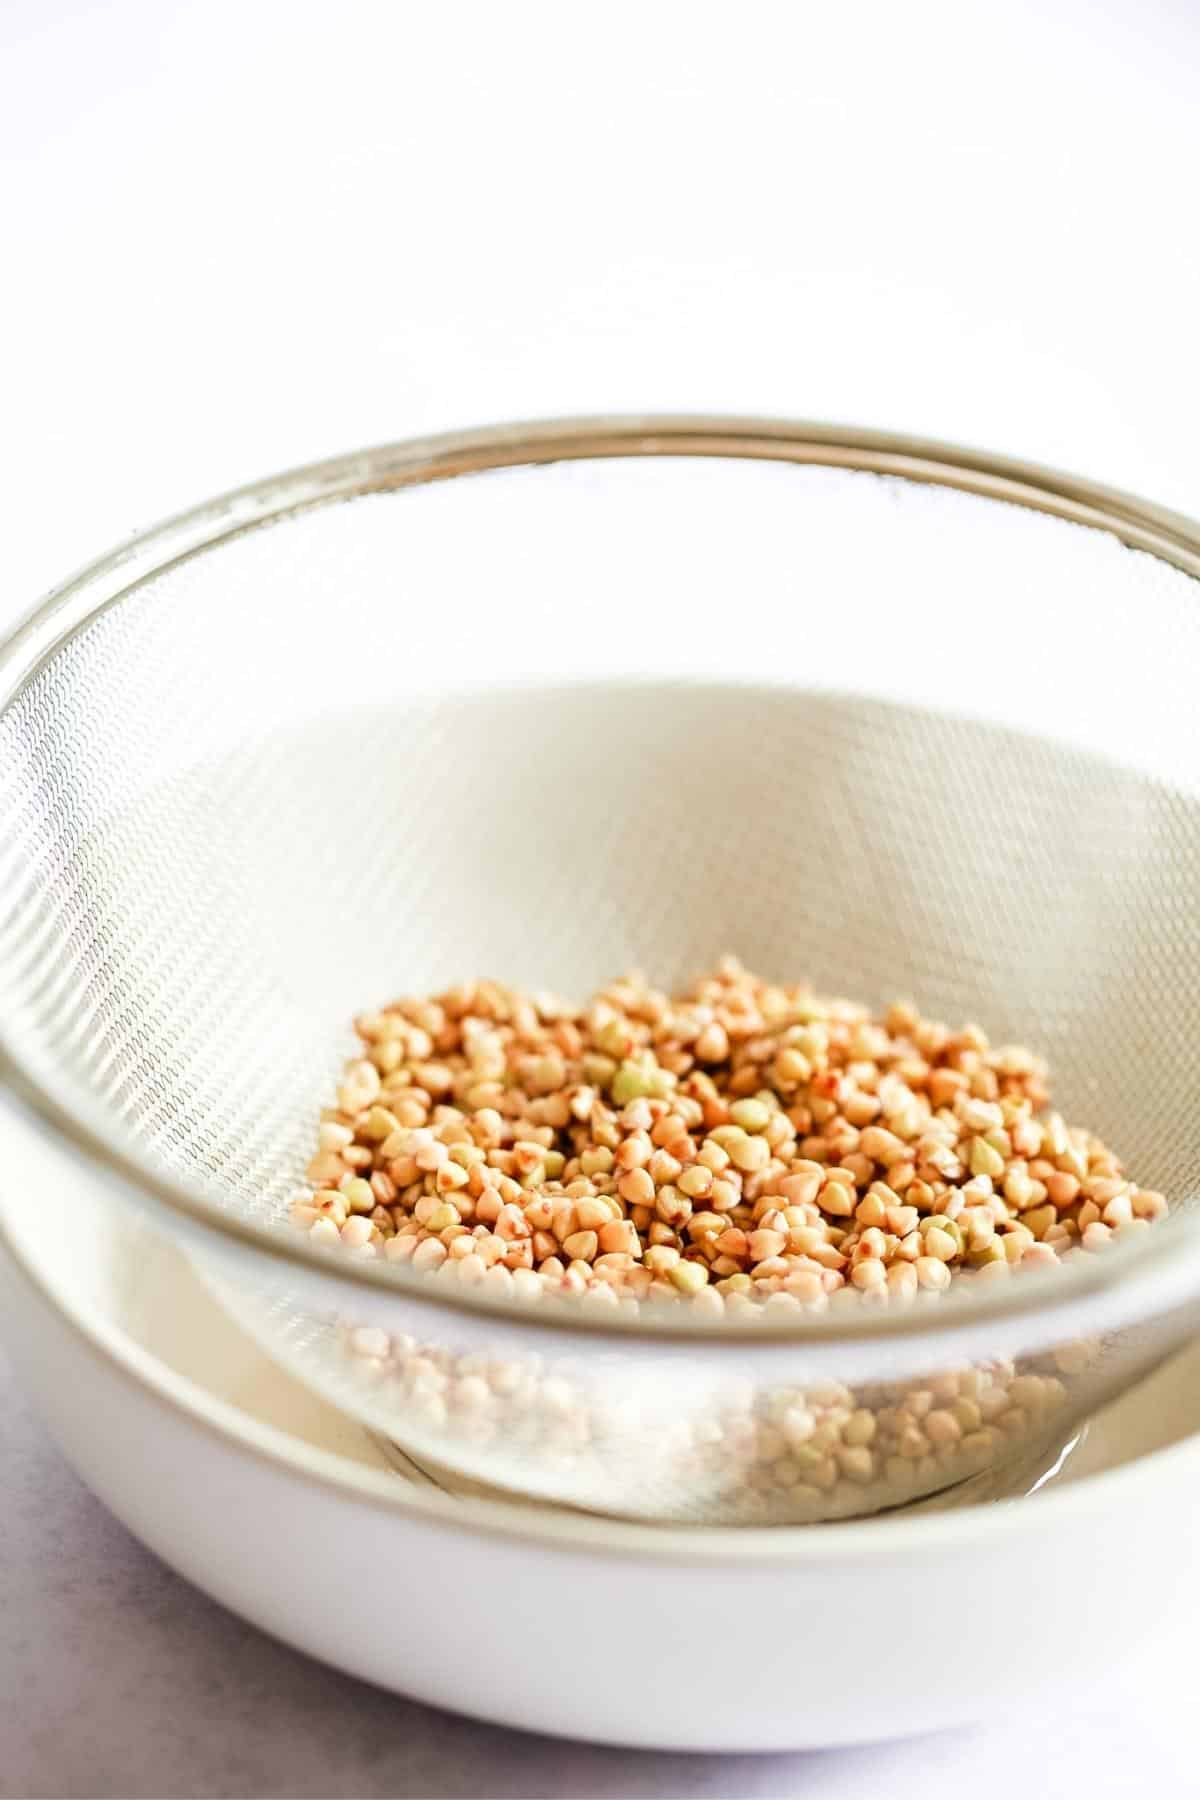 Raw buckwheat draining in a metal sieve placed over a bowl.